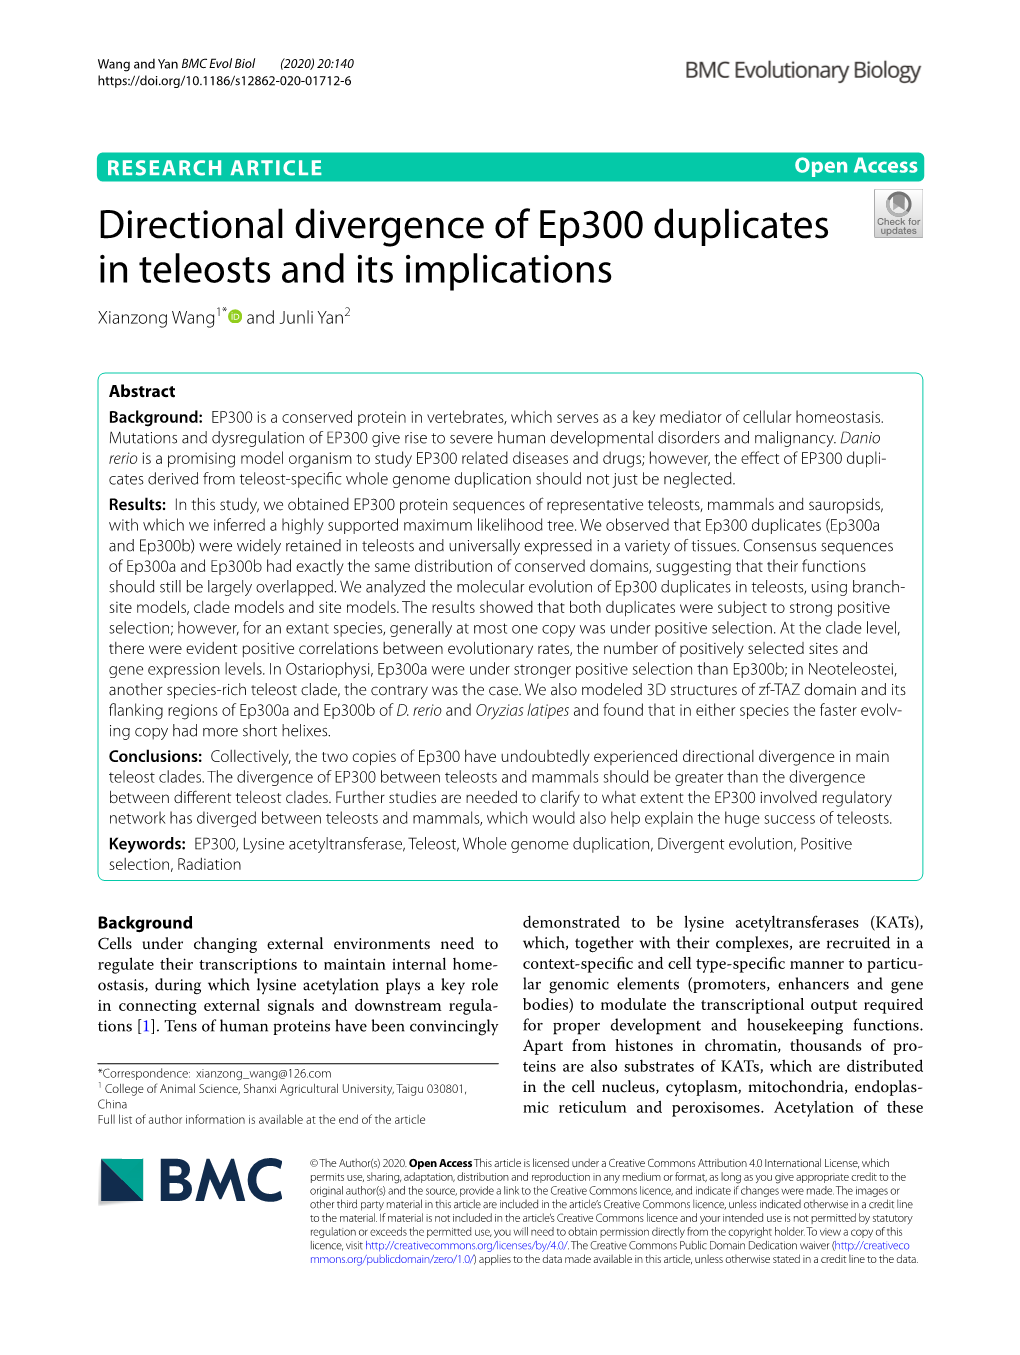 Directional Divergence of Ep300 Duplicates in Teleosts and Its Implications Xianzong Wang1* and Junli Yan2